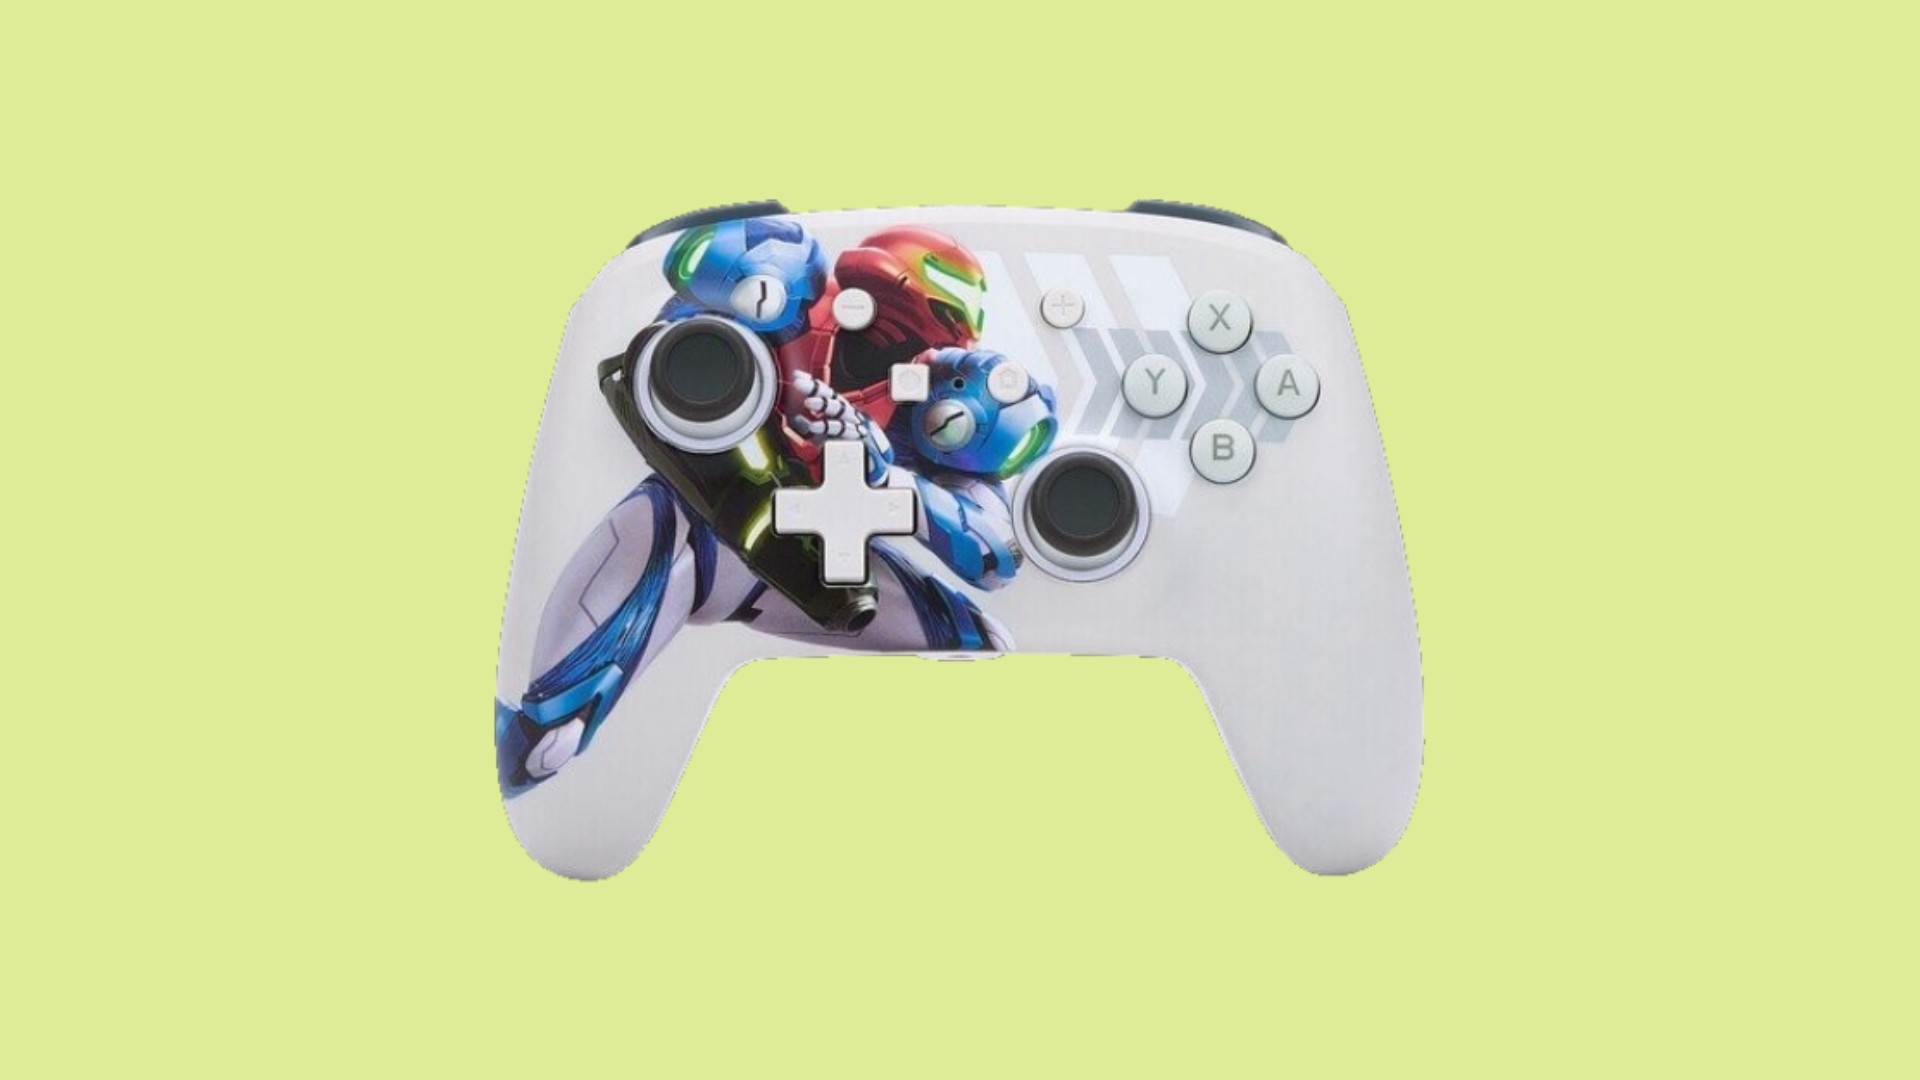 Best Nintendo Switch controllers - image shows a controller featuring Metroid Dread artwork.